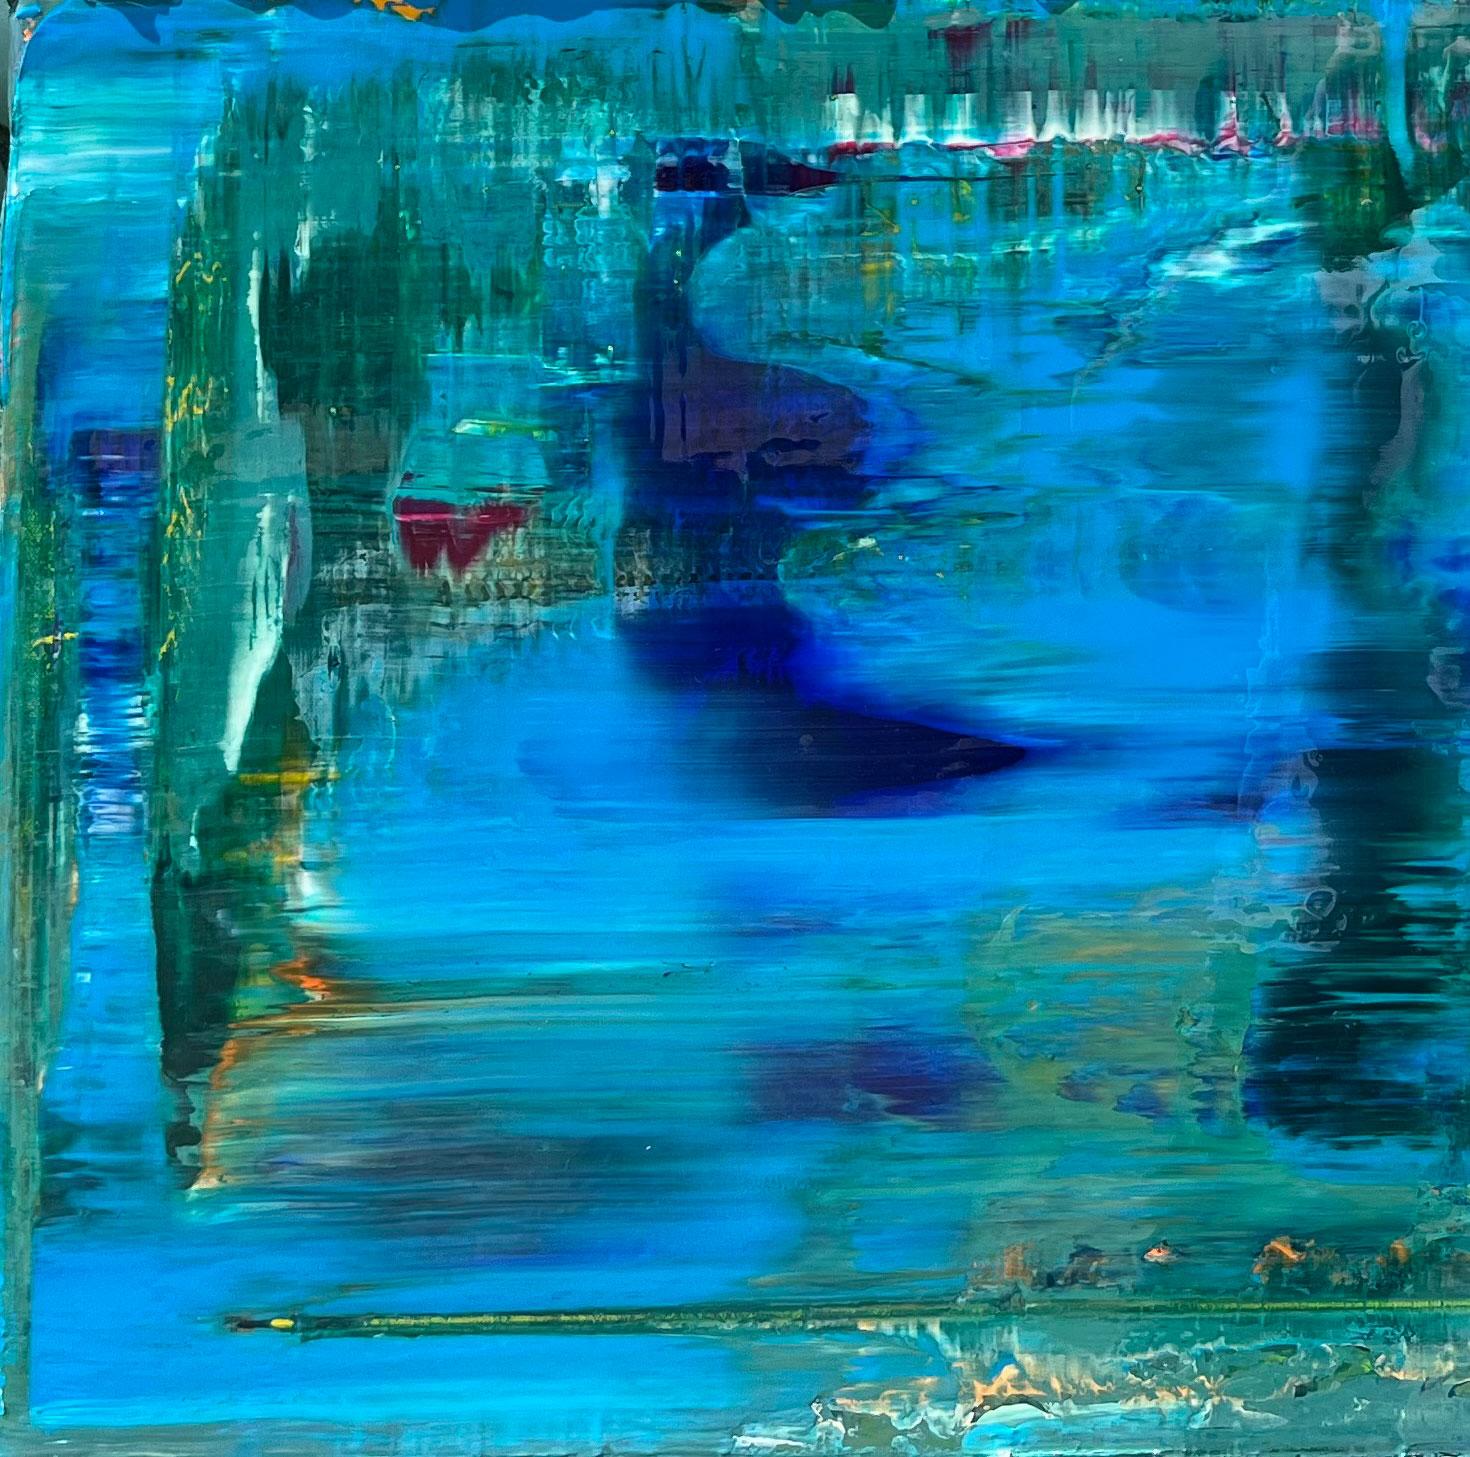 Climate Change - Rio de Janeiro - Abstract Painting by Antonio Franchi